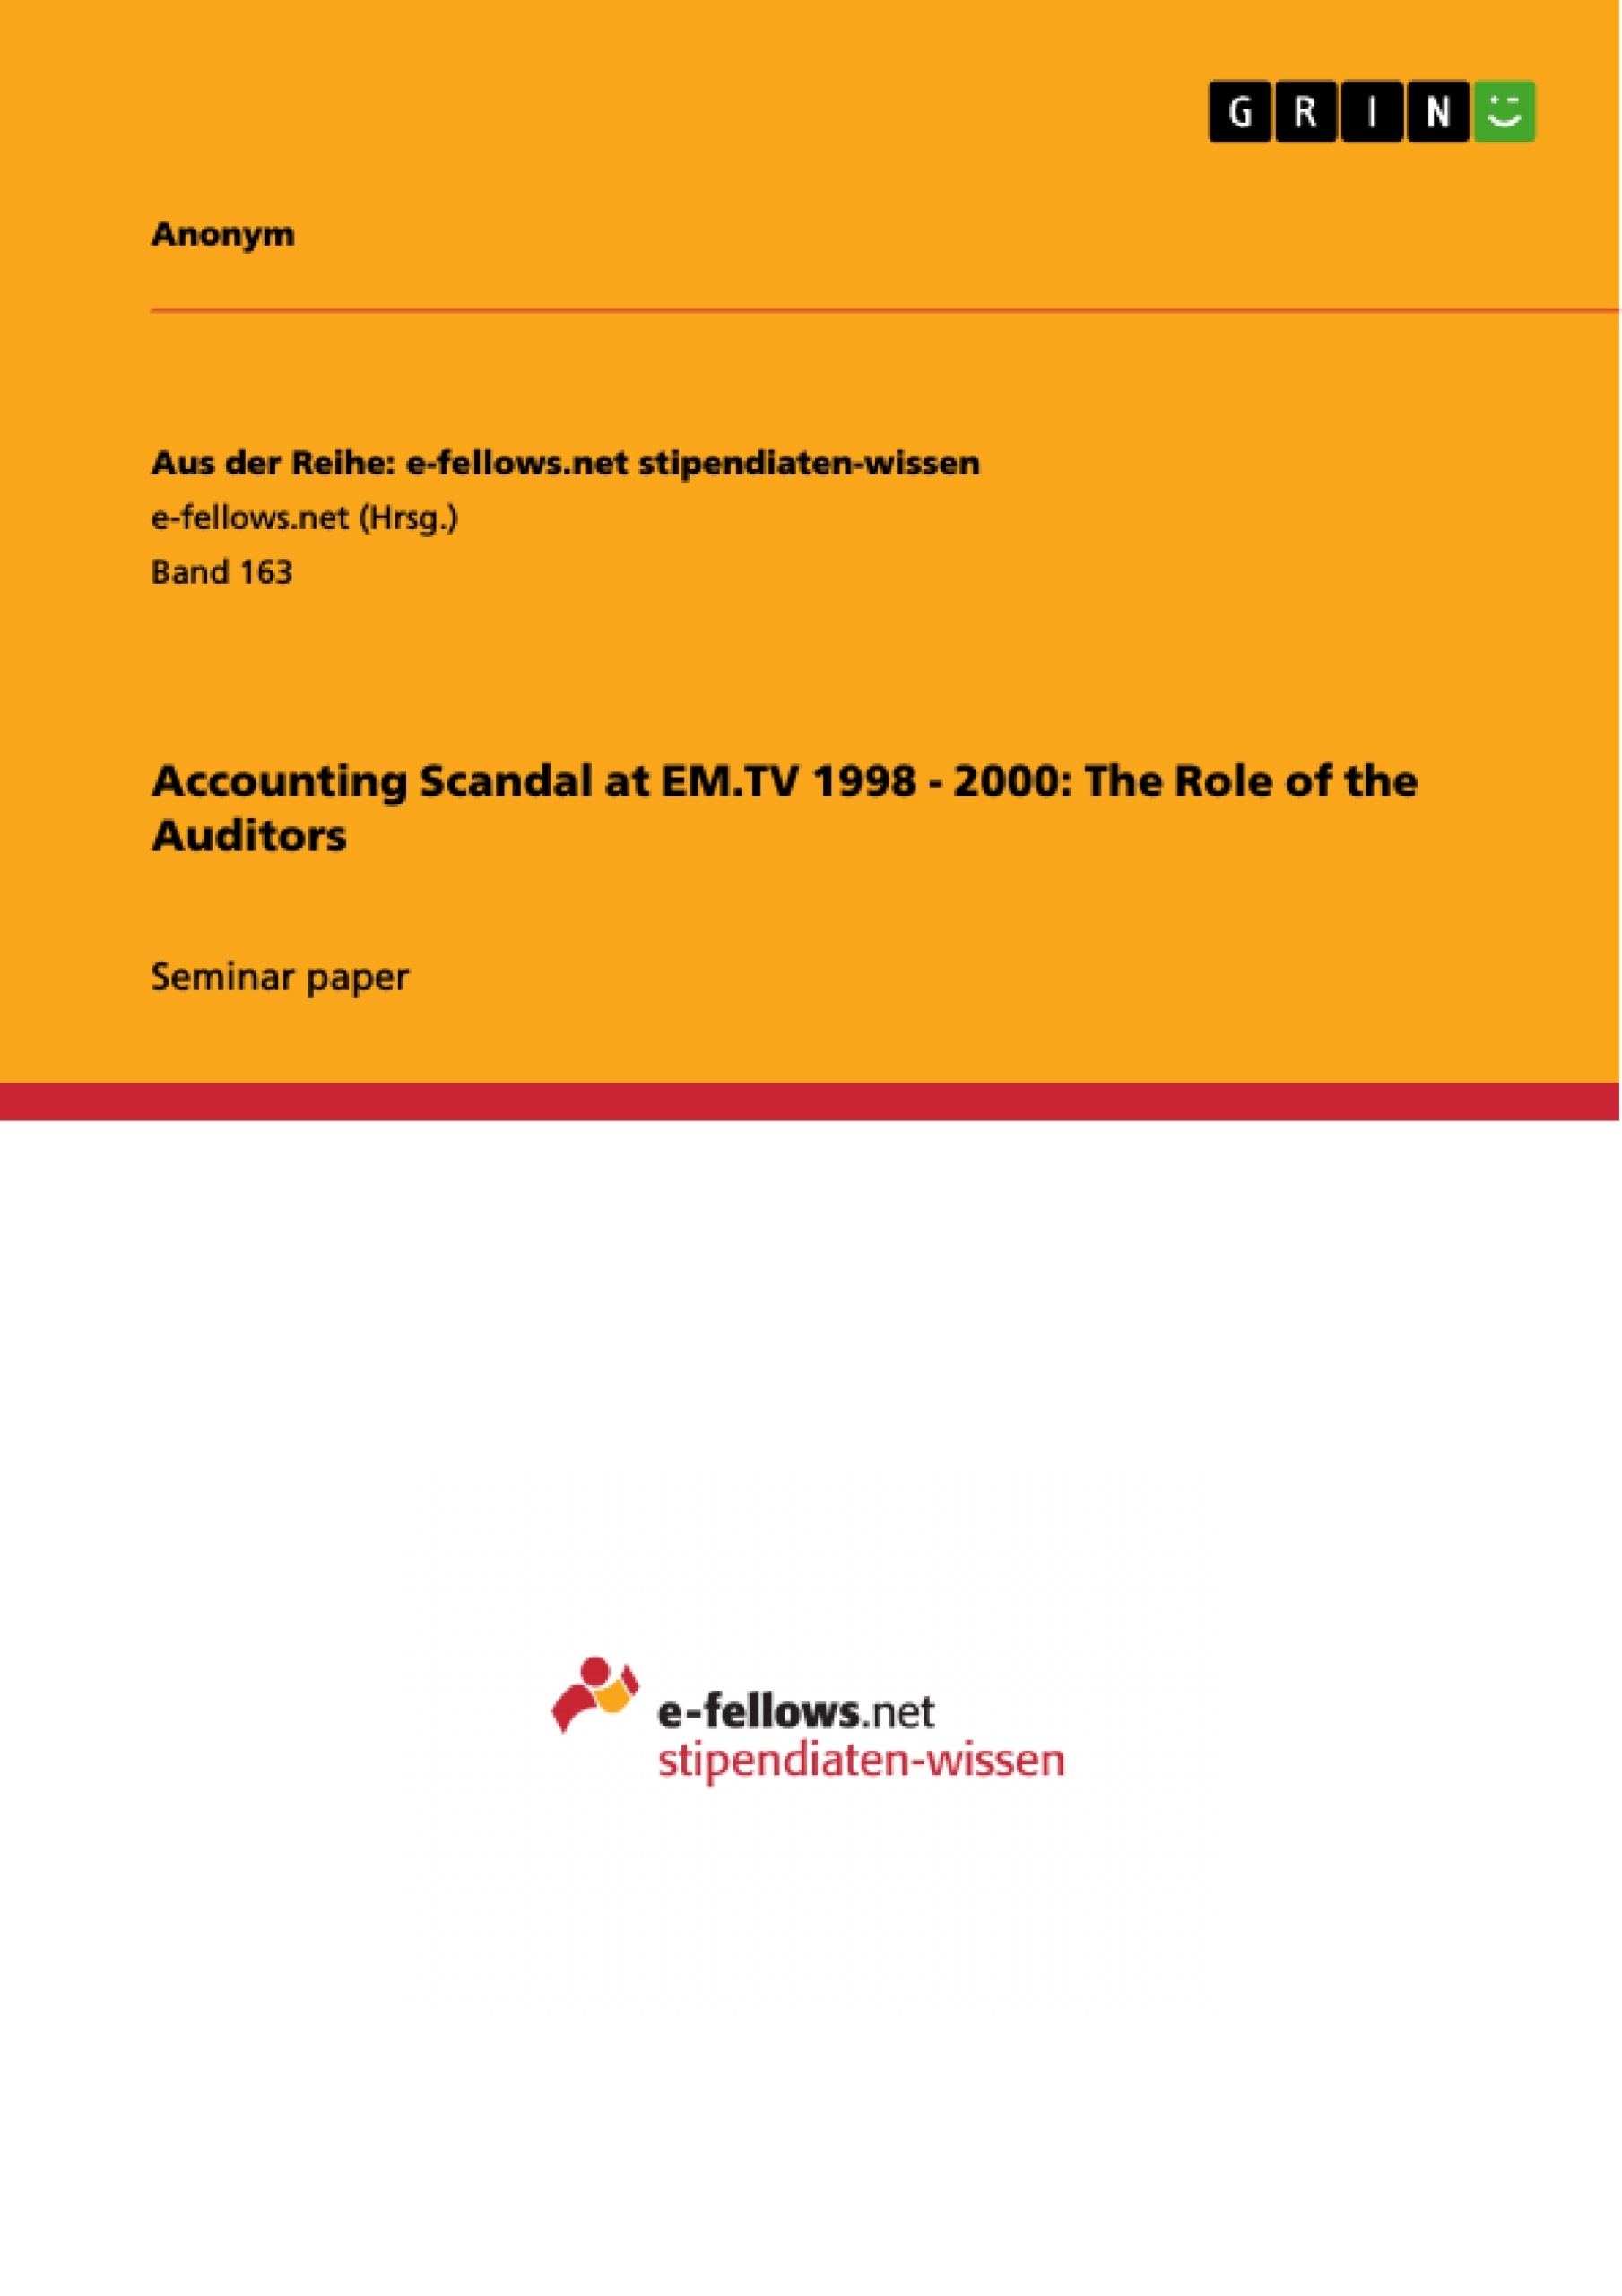 Título: Accounting Scandal at EM.TV 1998 - 2000: The Role of the Auditors